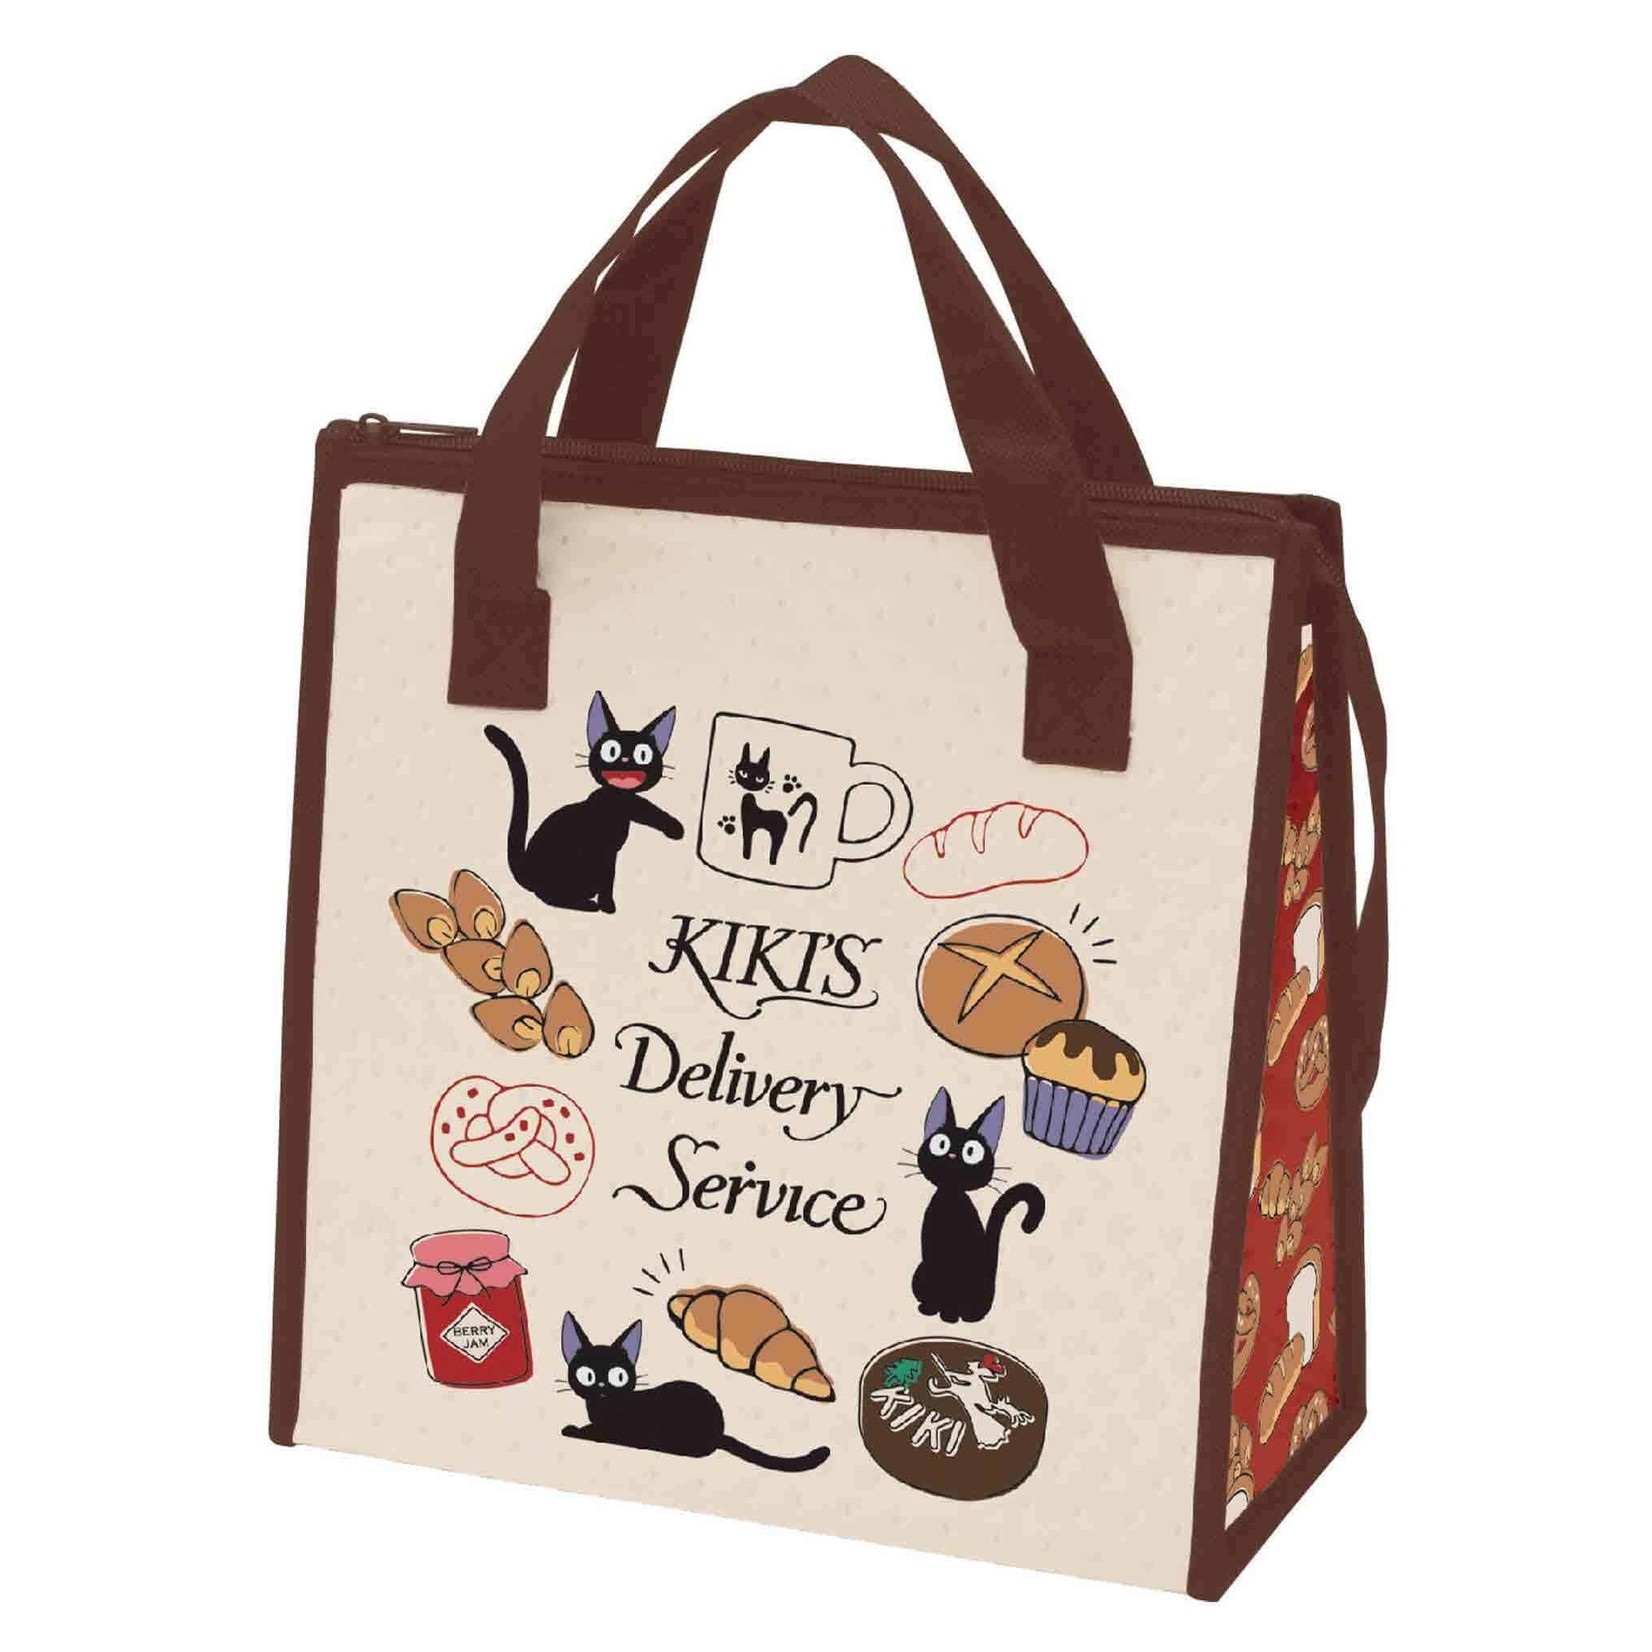 Skater Insulated Lunch Tote - Kiki's Delivery Service (Bakery) SK-GHB-1511